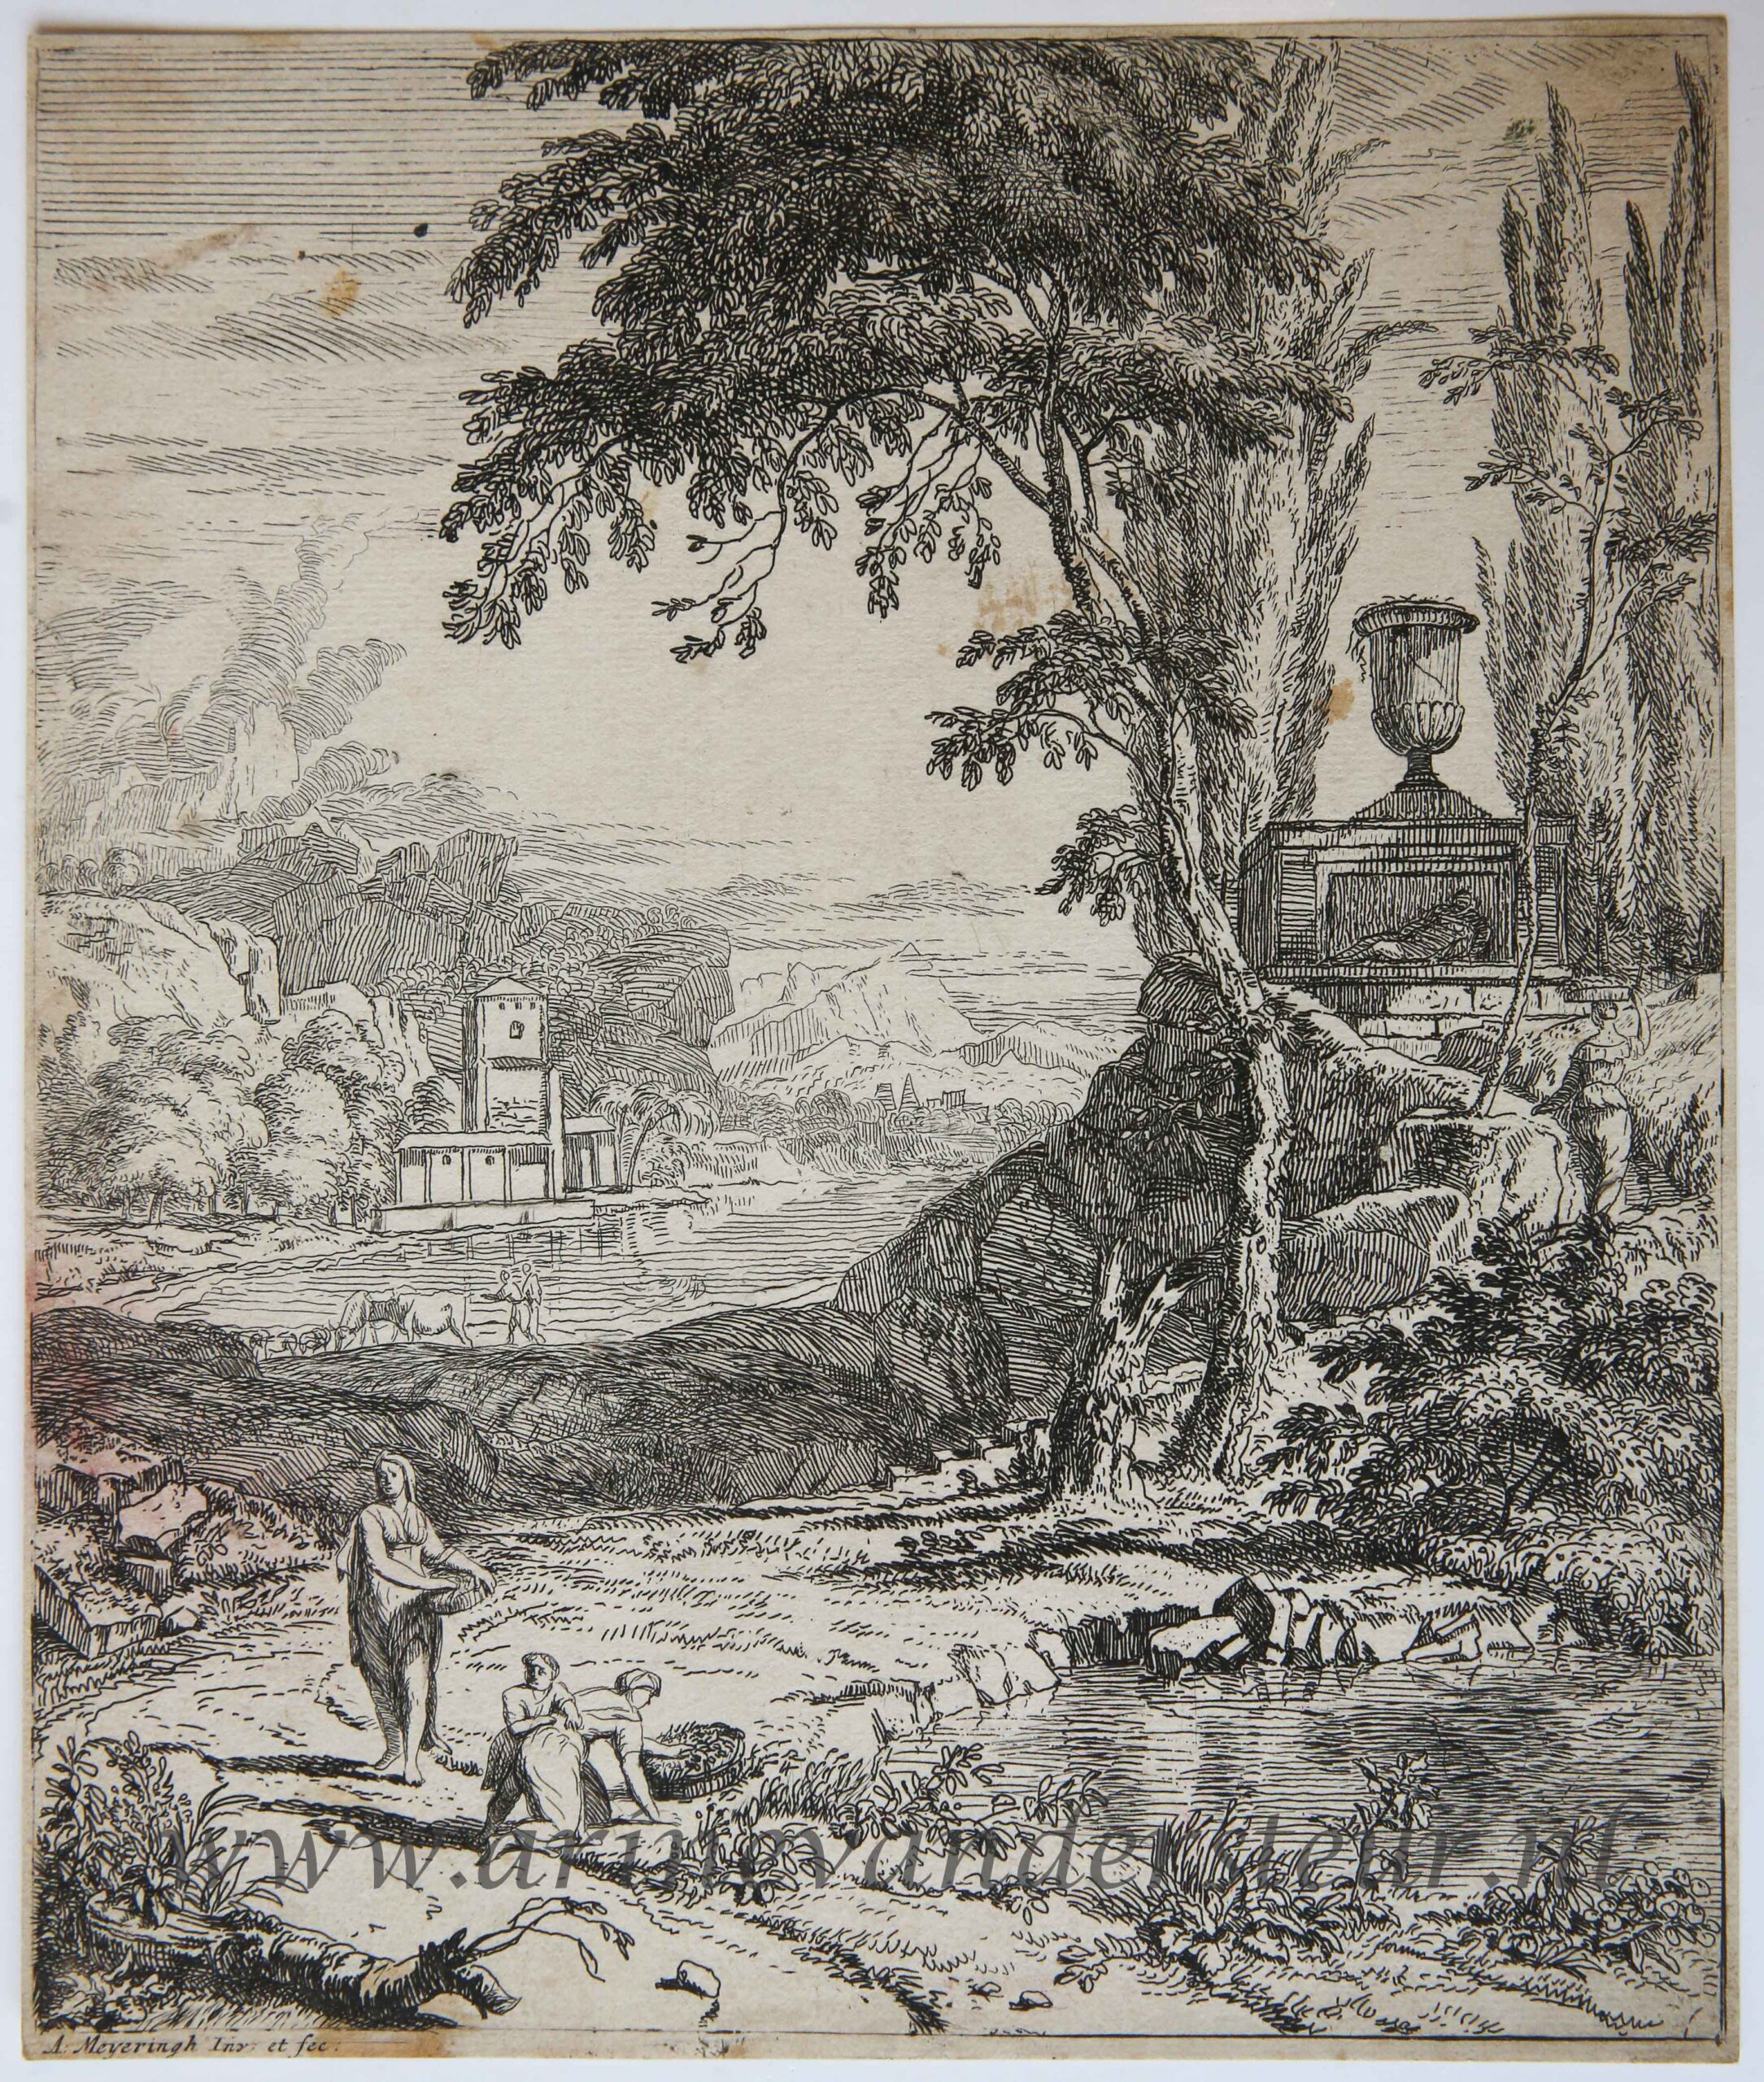 [Antique print, etching/ets] Italian landscape by the water, published 1650-1700.